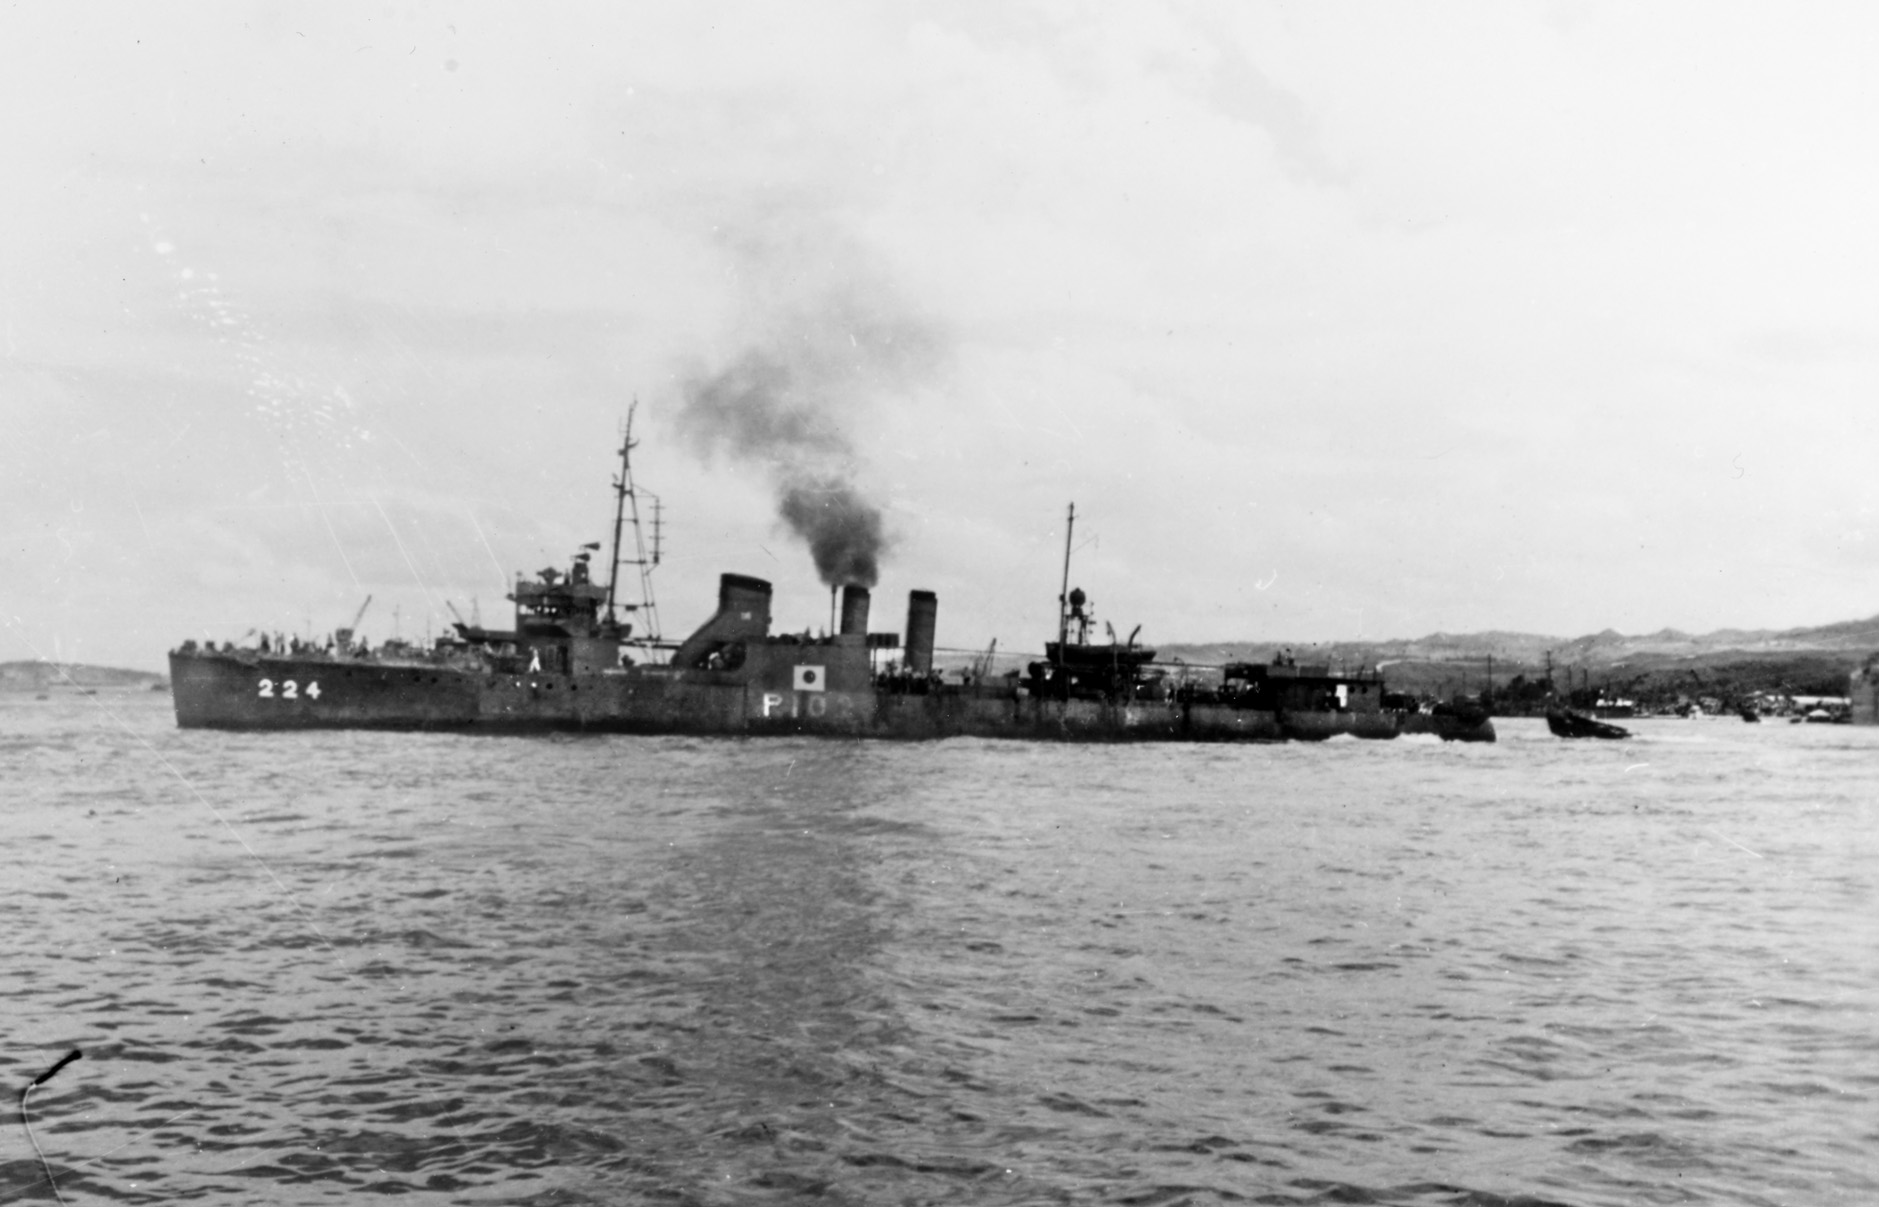 Bearing the markings of a Japanese warship, the Stewart lies in the harbor of Hiro Wan, Japan, on October 29, 1945. This photograph was taken after the destroyer was returned to the U.S. Navy; however, the Japanese flag and her designation as patrol boat P102 are visible amidships.  